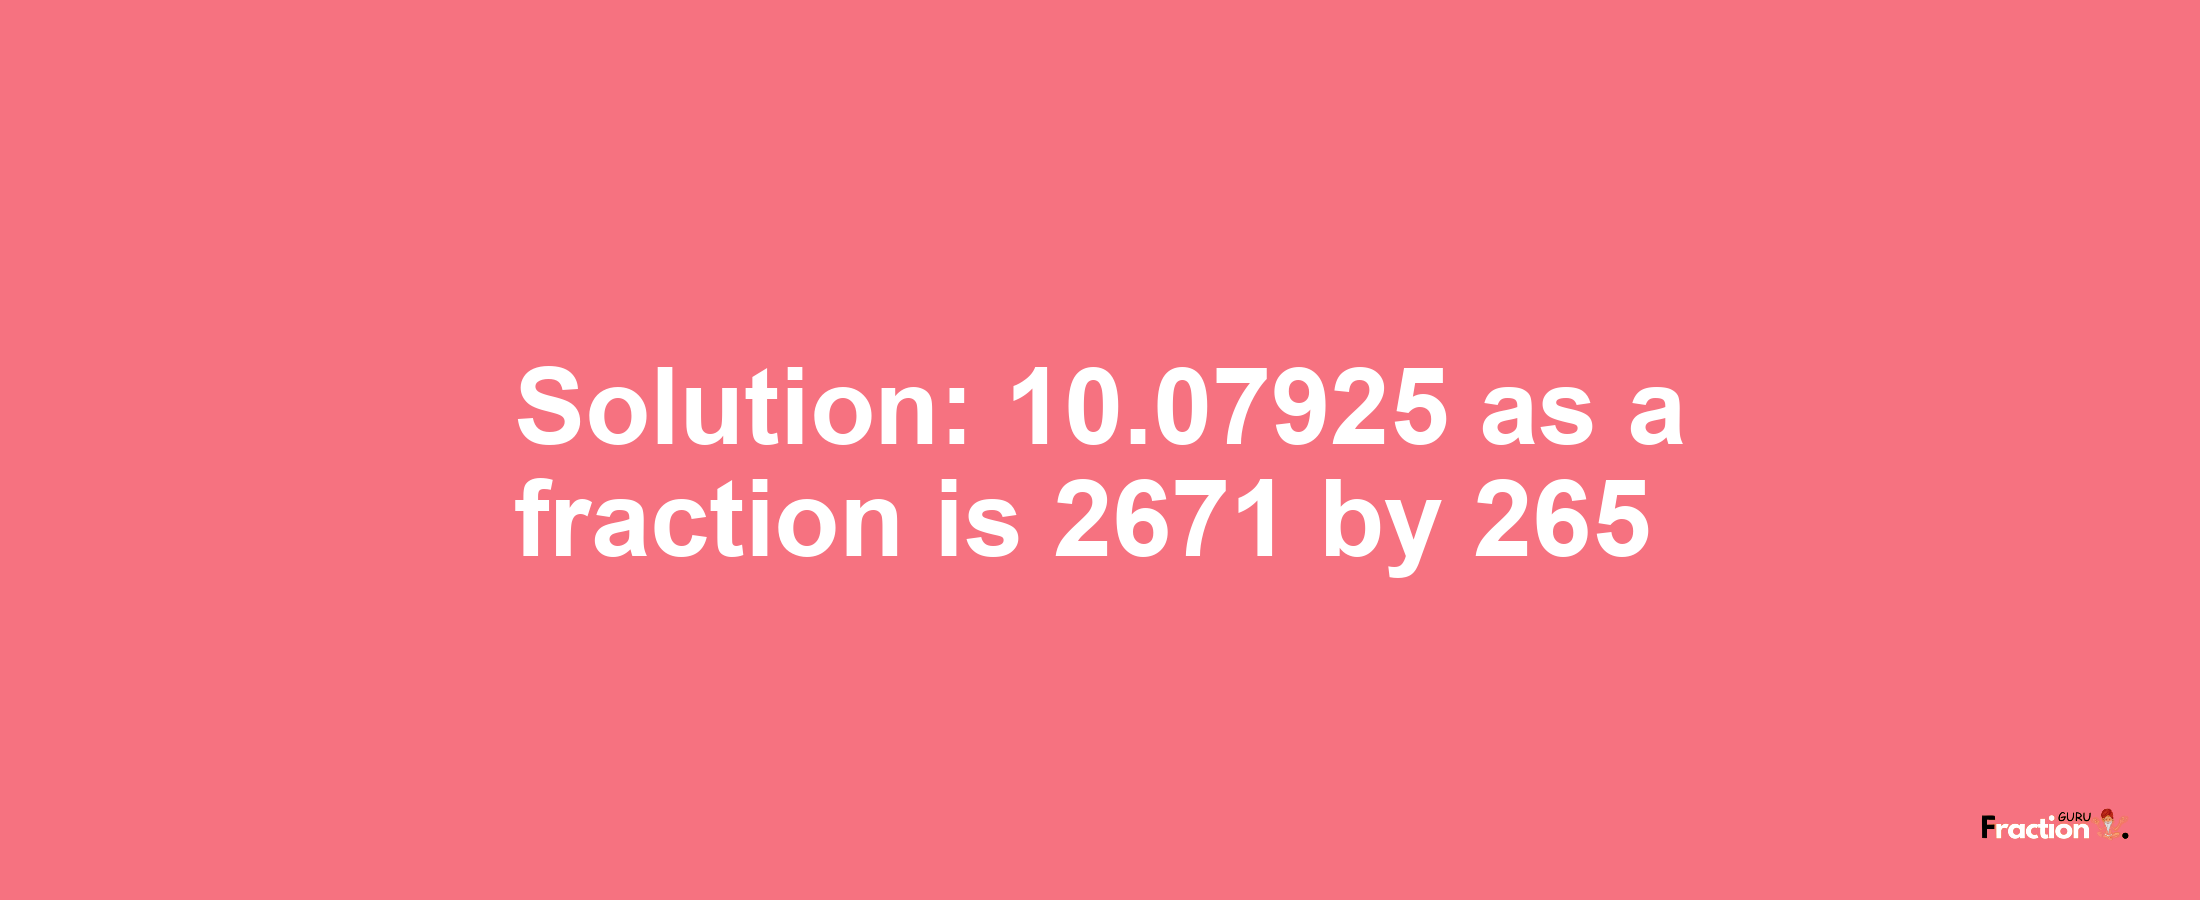 Solution:10.07925 as a fraction is 2671/265